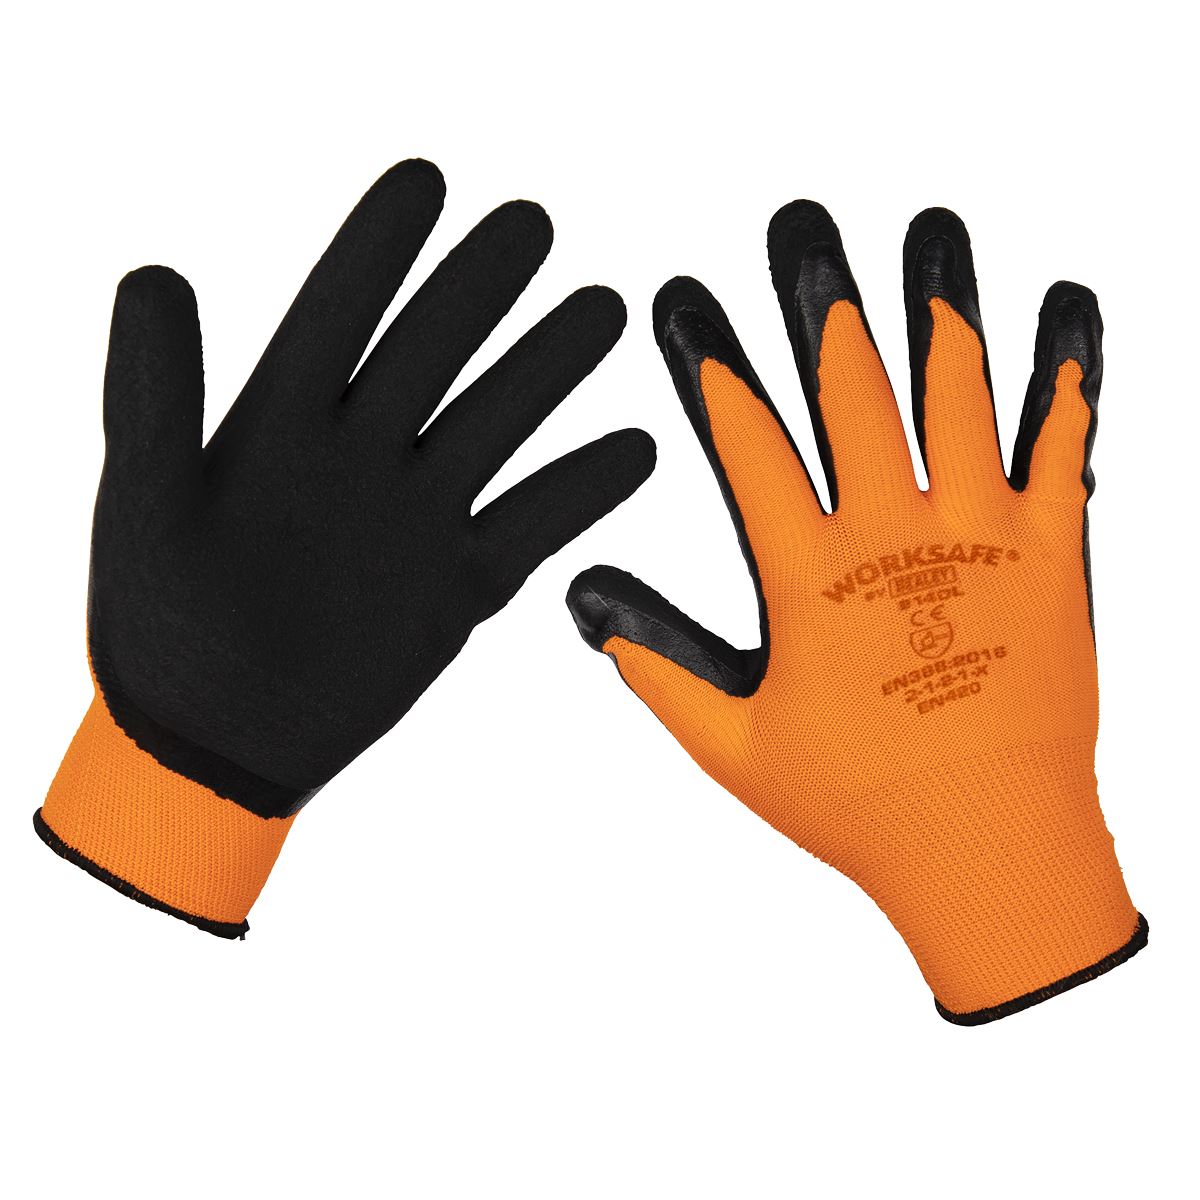 Worksafe by Sealey Foam Latex Gloves (Large) - Pack of 6 Pairs